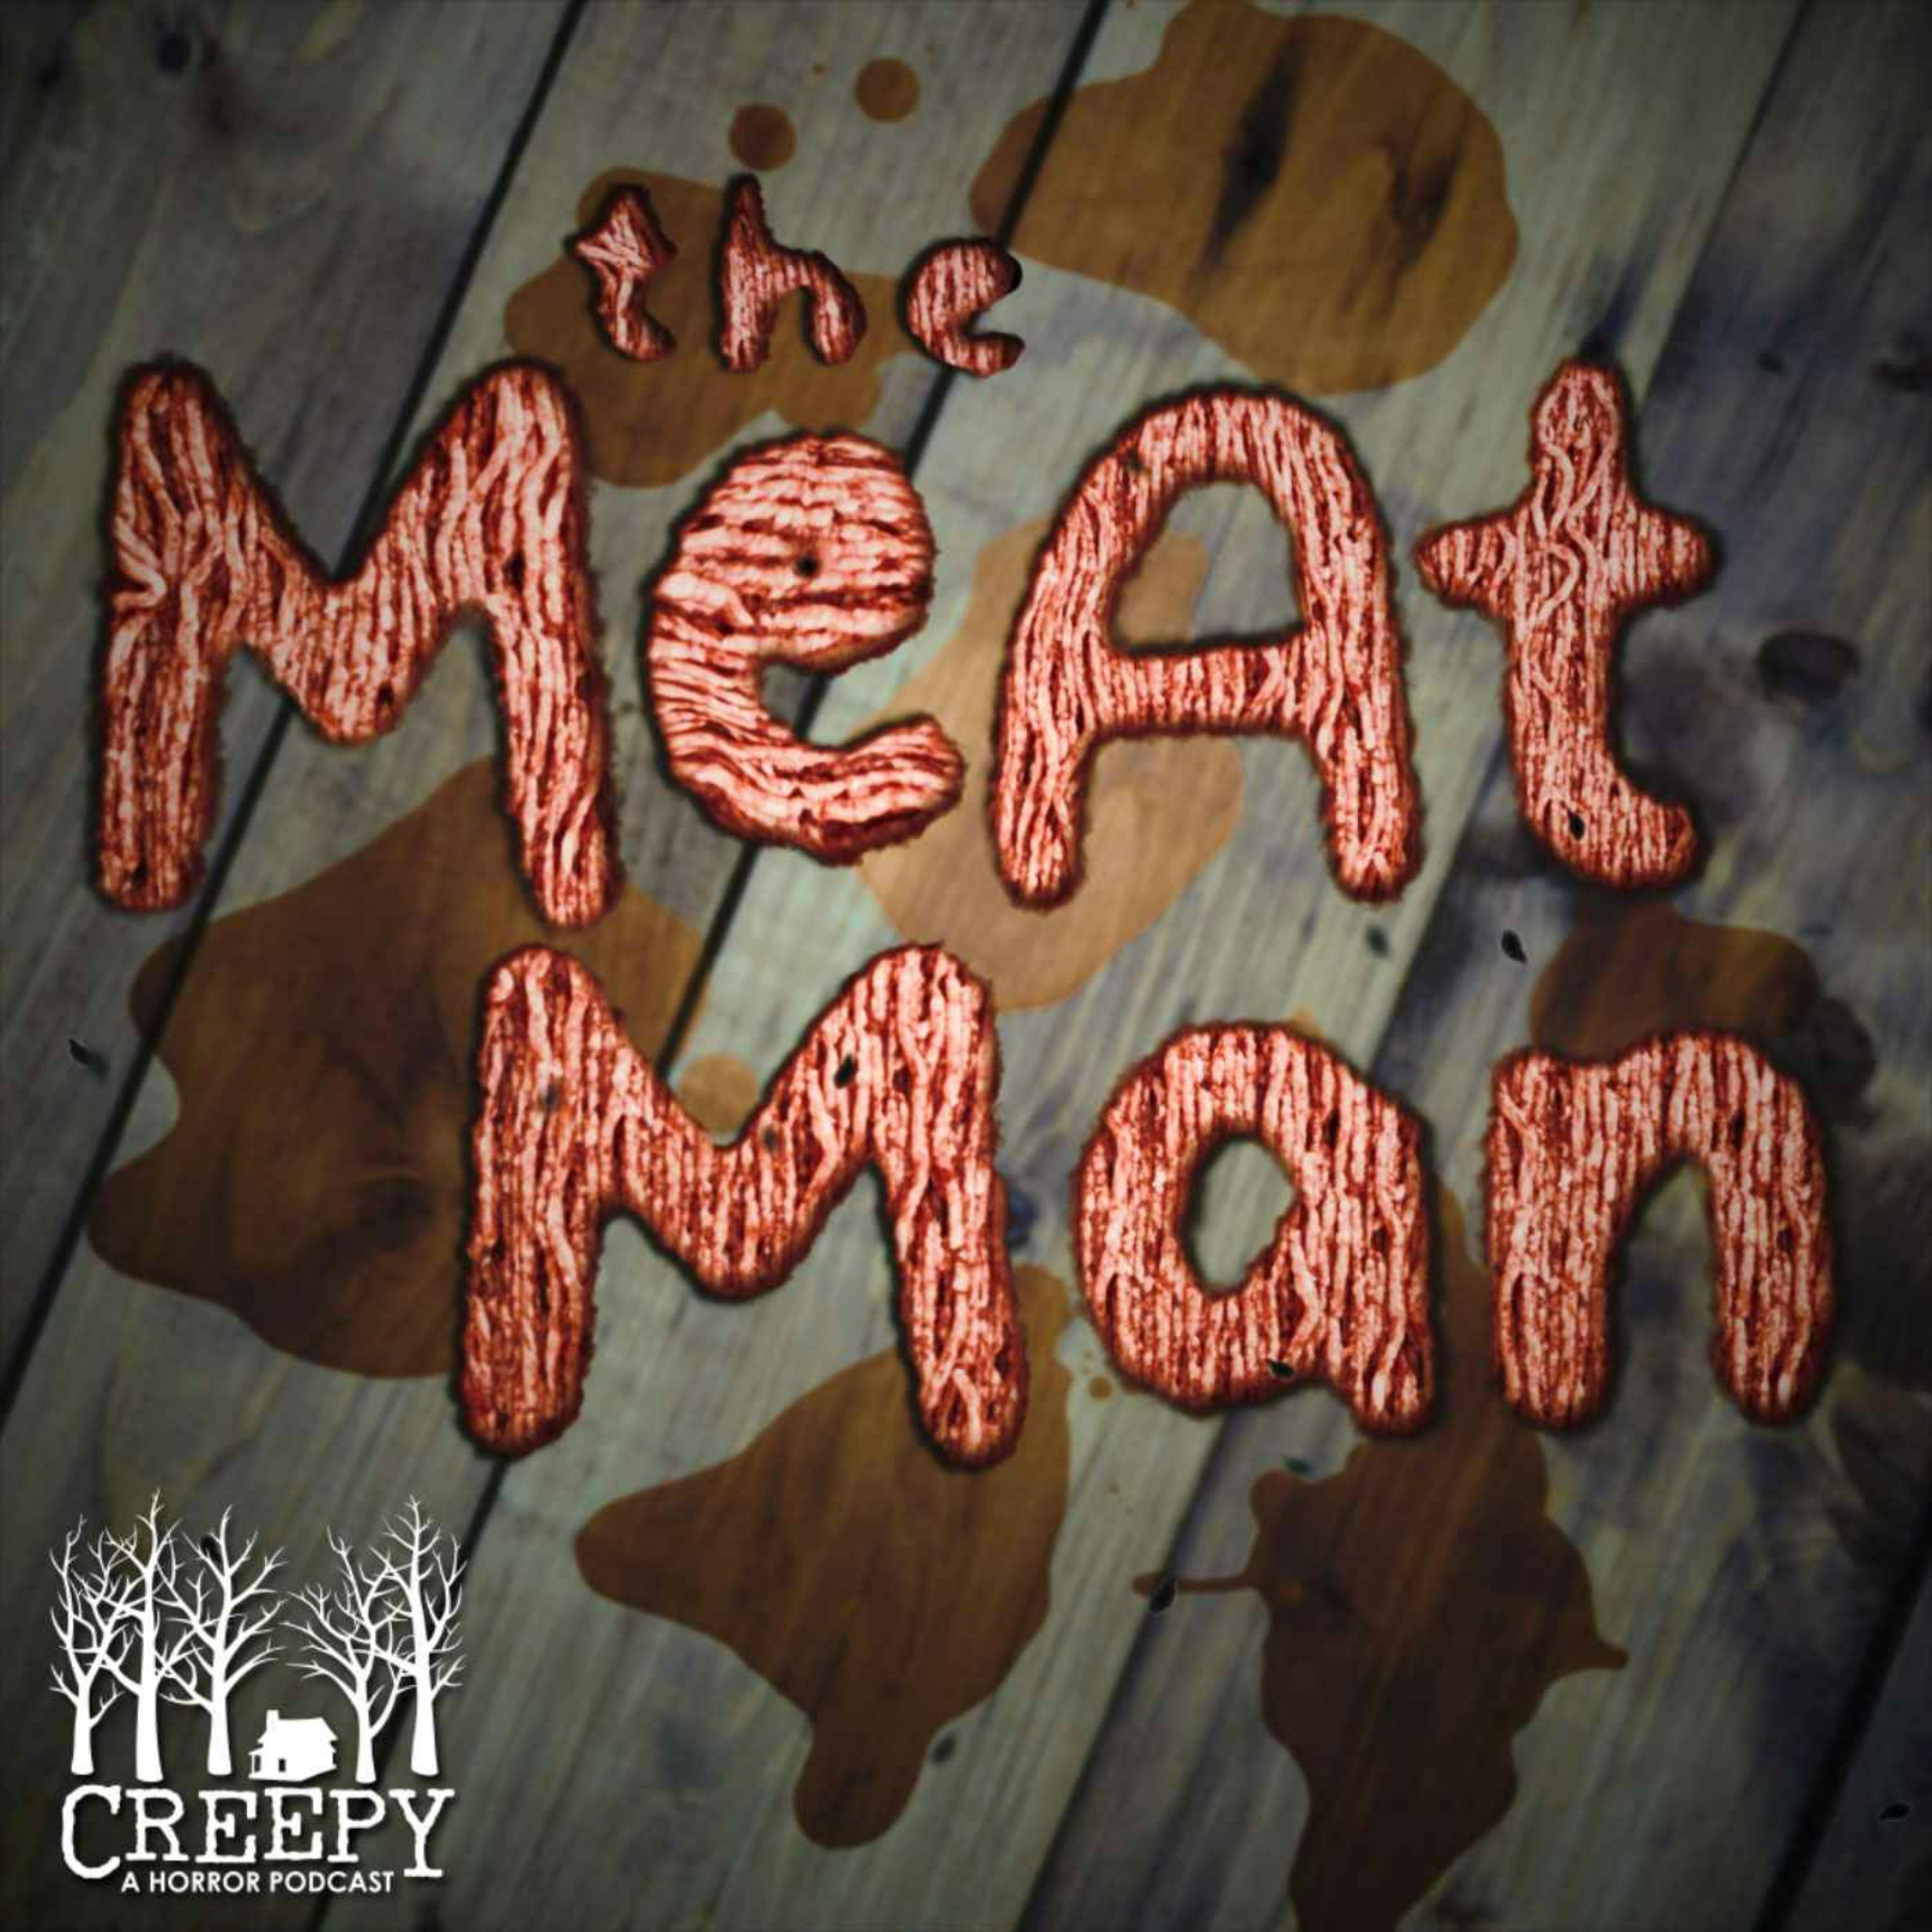 The Meat Man